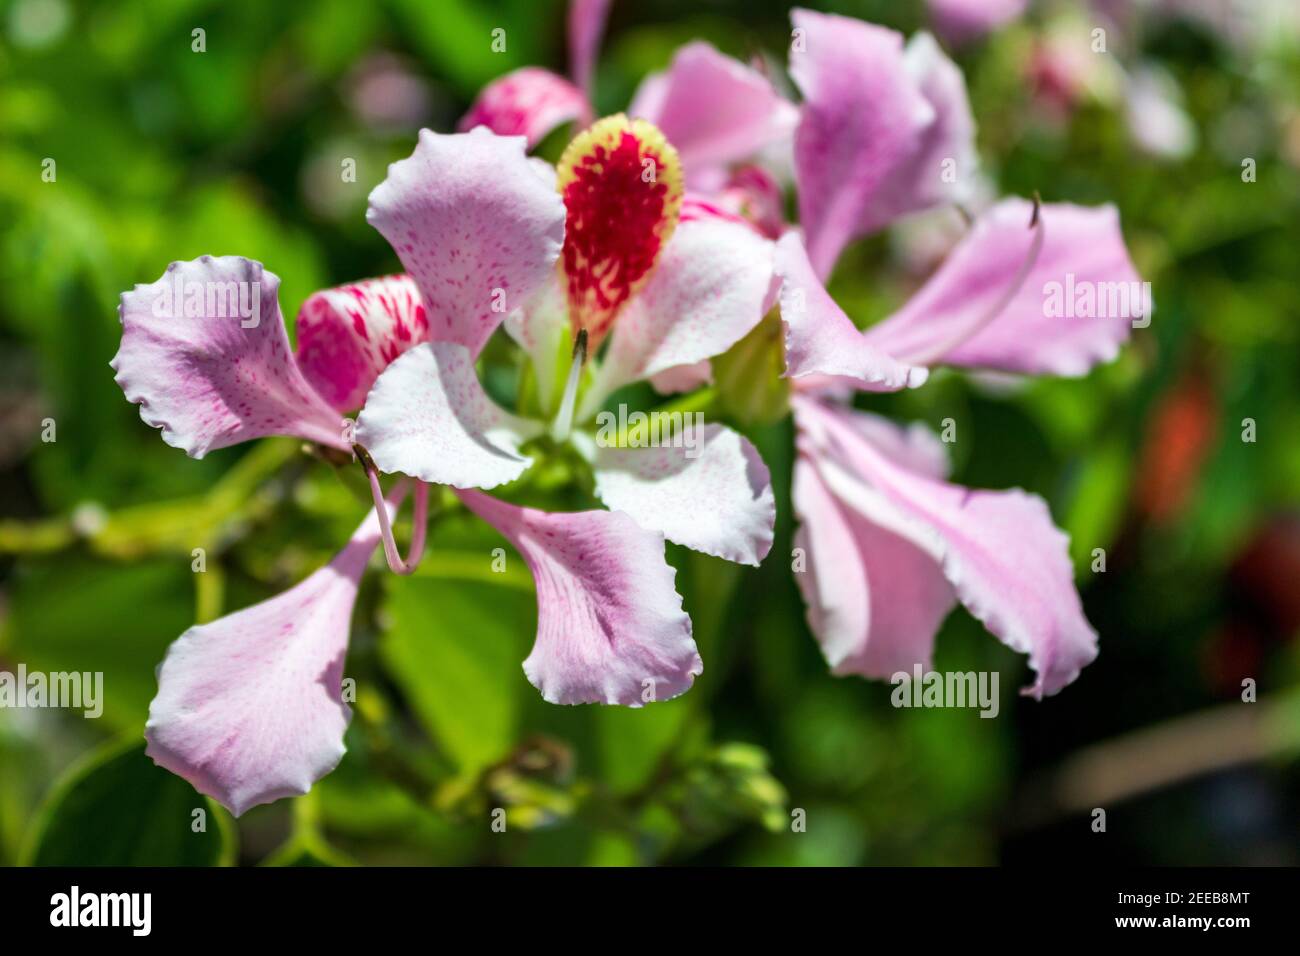 Bauhinia monandra is a species of leguminous trees, of the family Fabaceae. Common names include pink bauhinia, orchid tree, and Napoleon's plume. Stock Photo